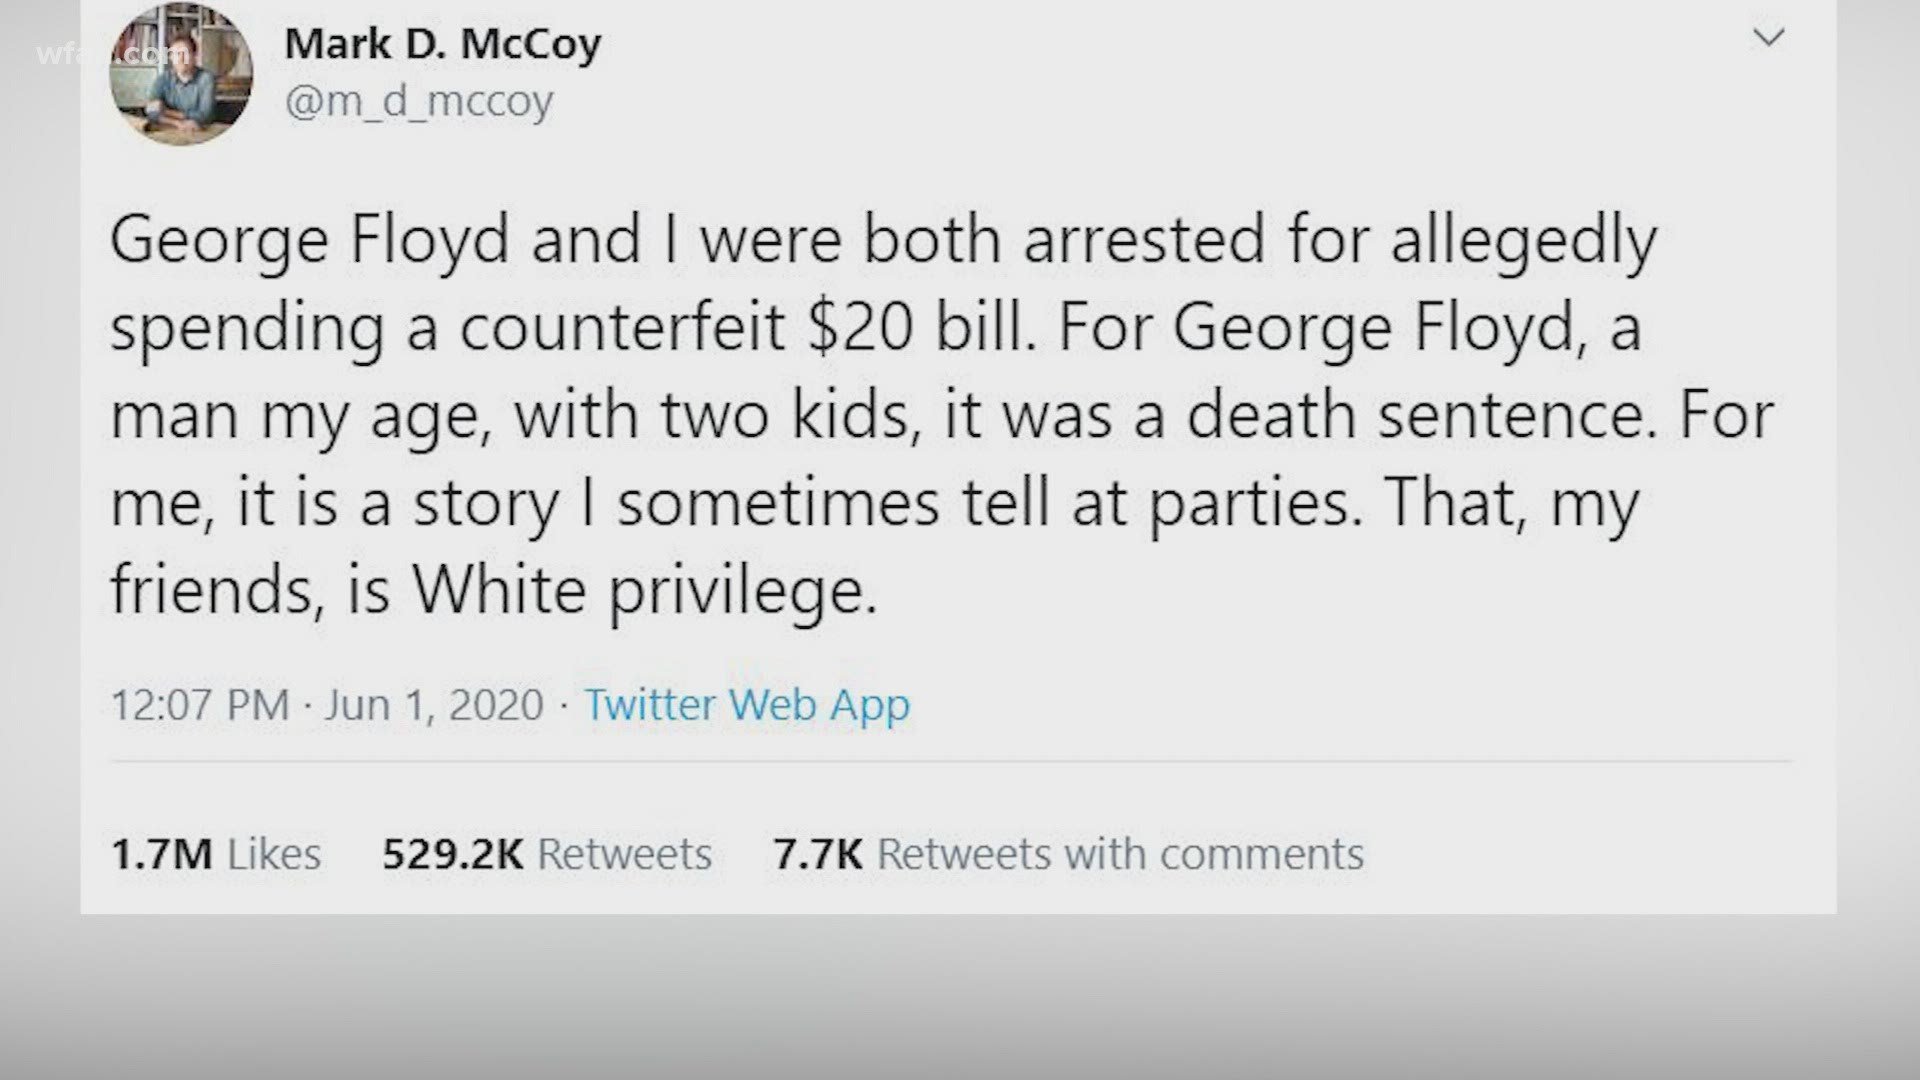 Mark McCoy and George Floyd were arrested for the same crime.